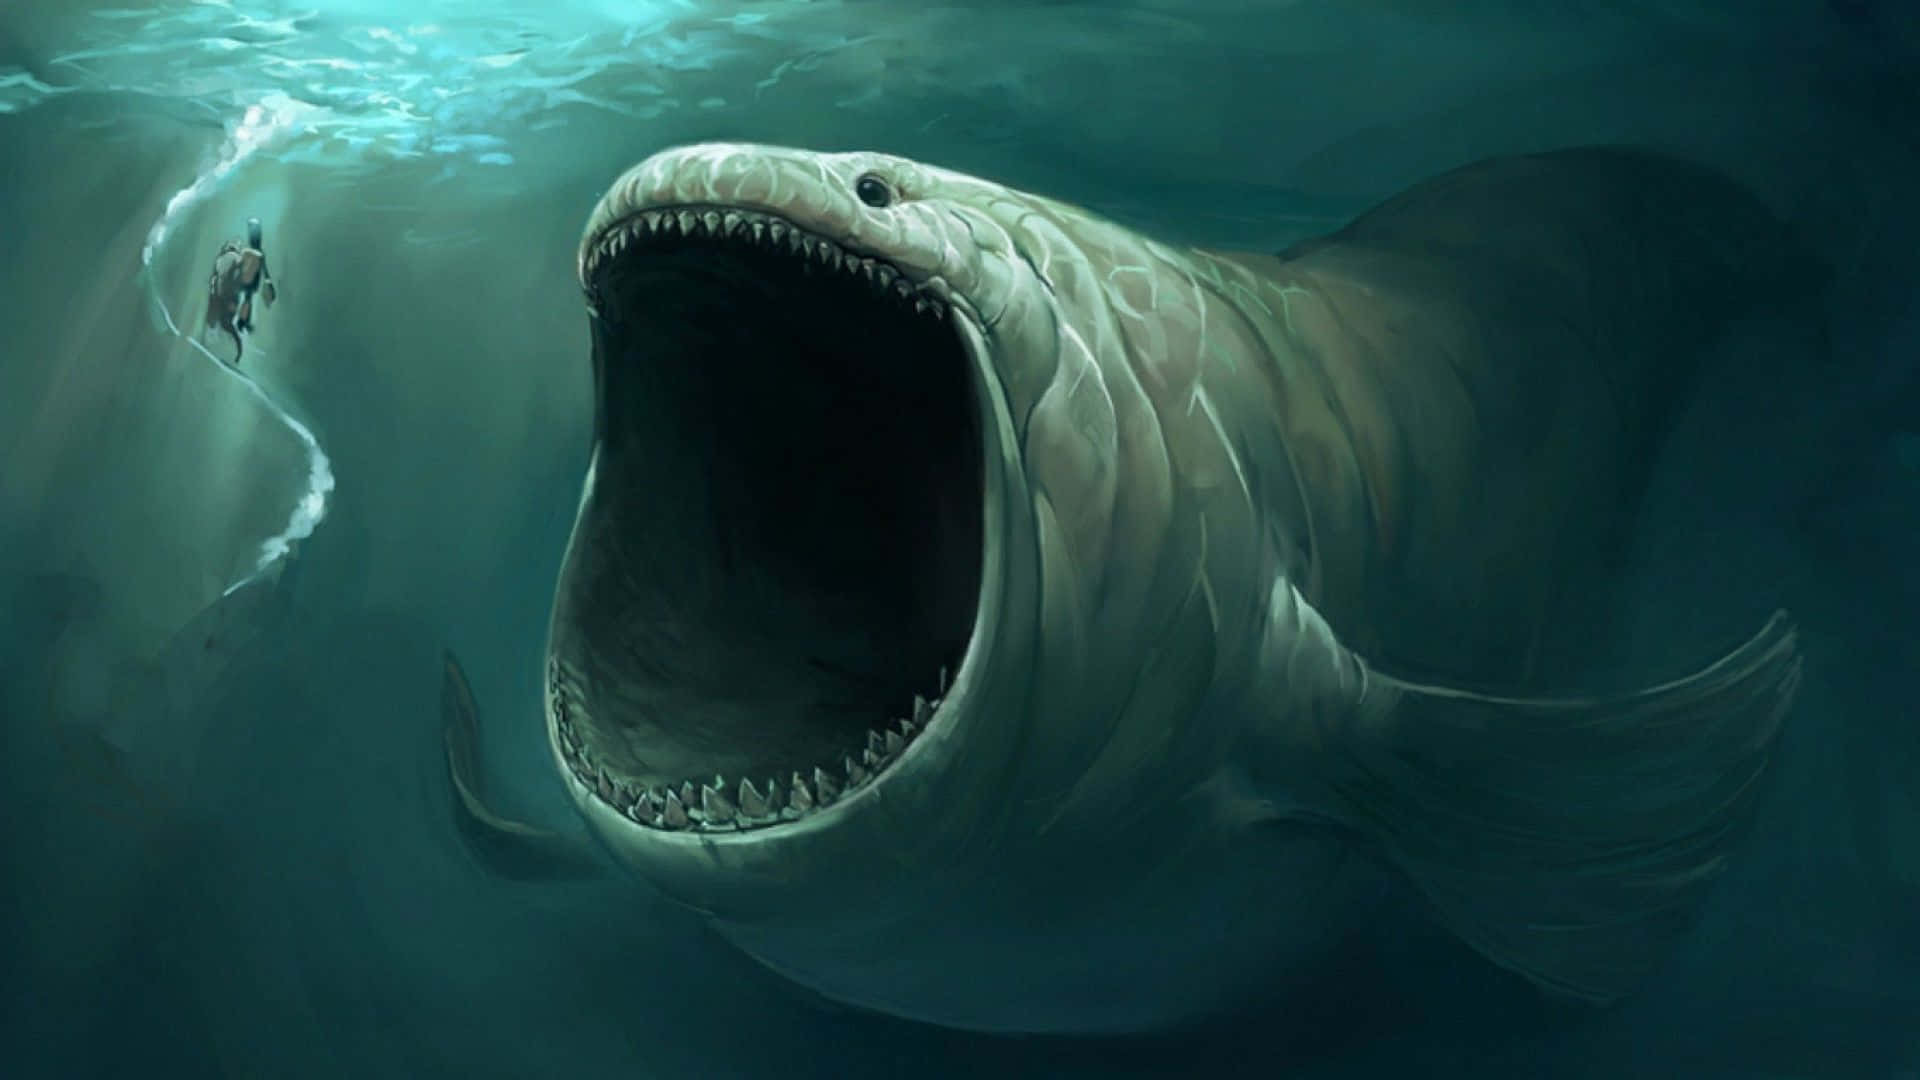 Nothing stopped the teeth of the Megalodon